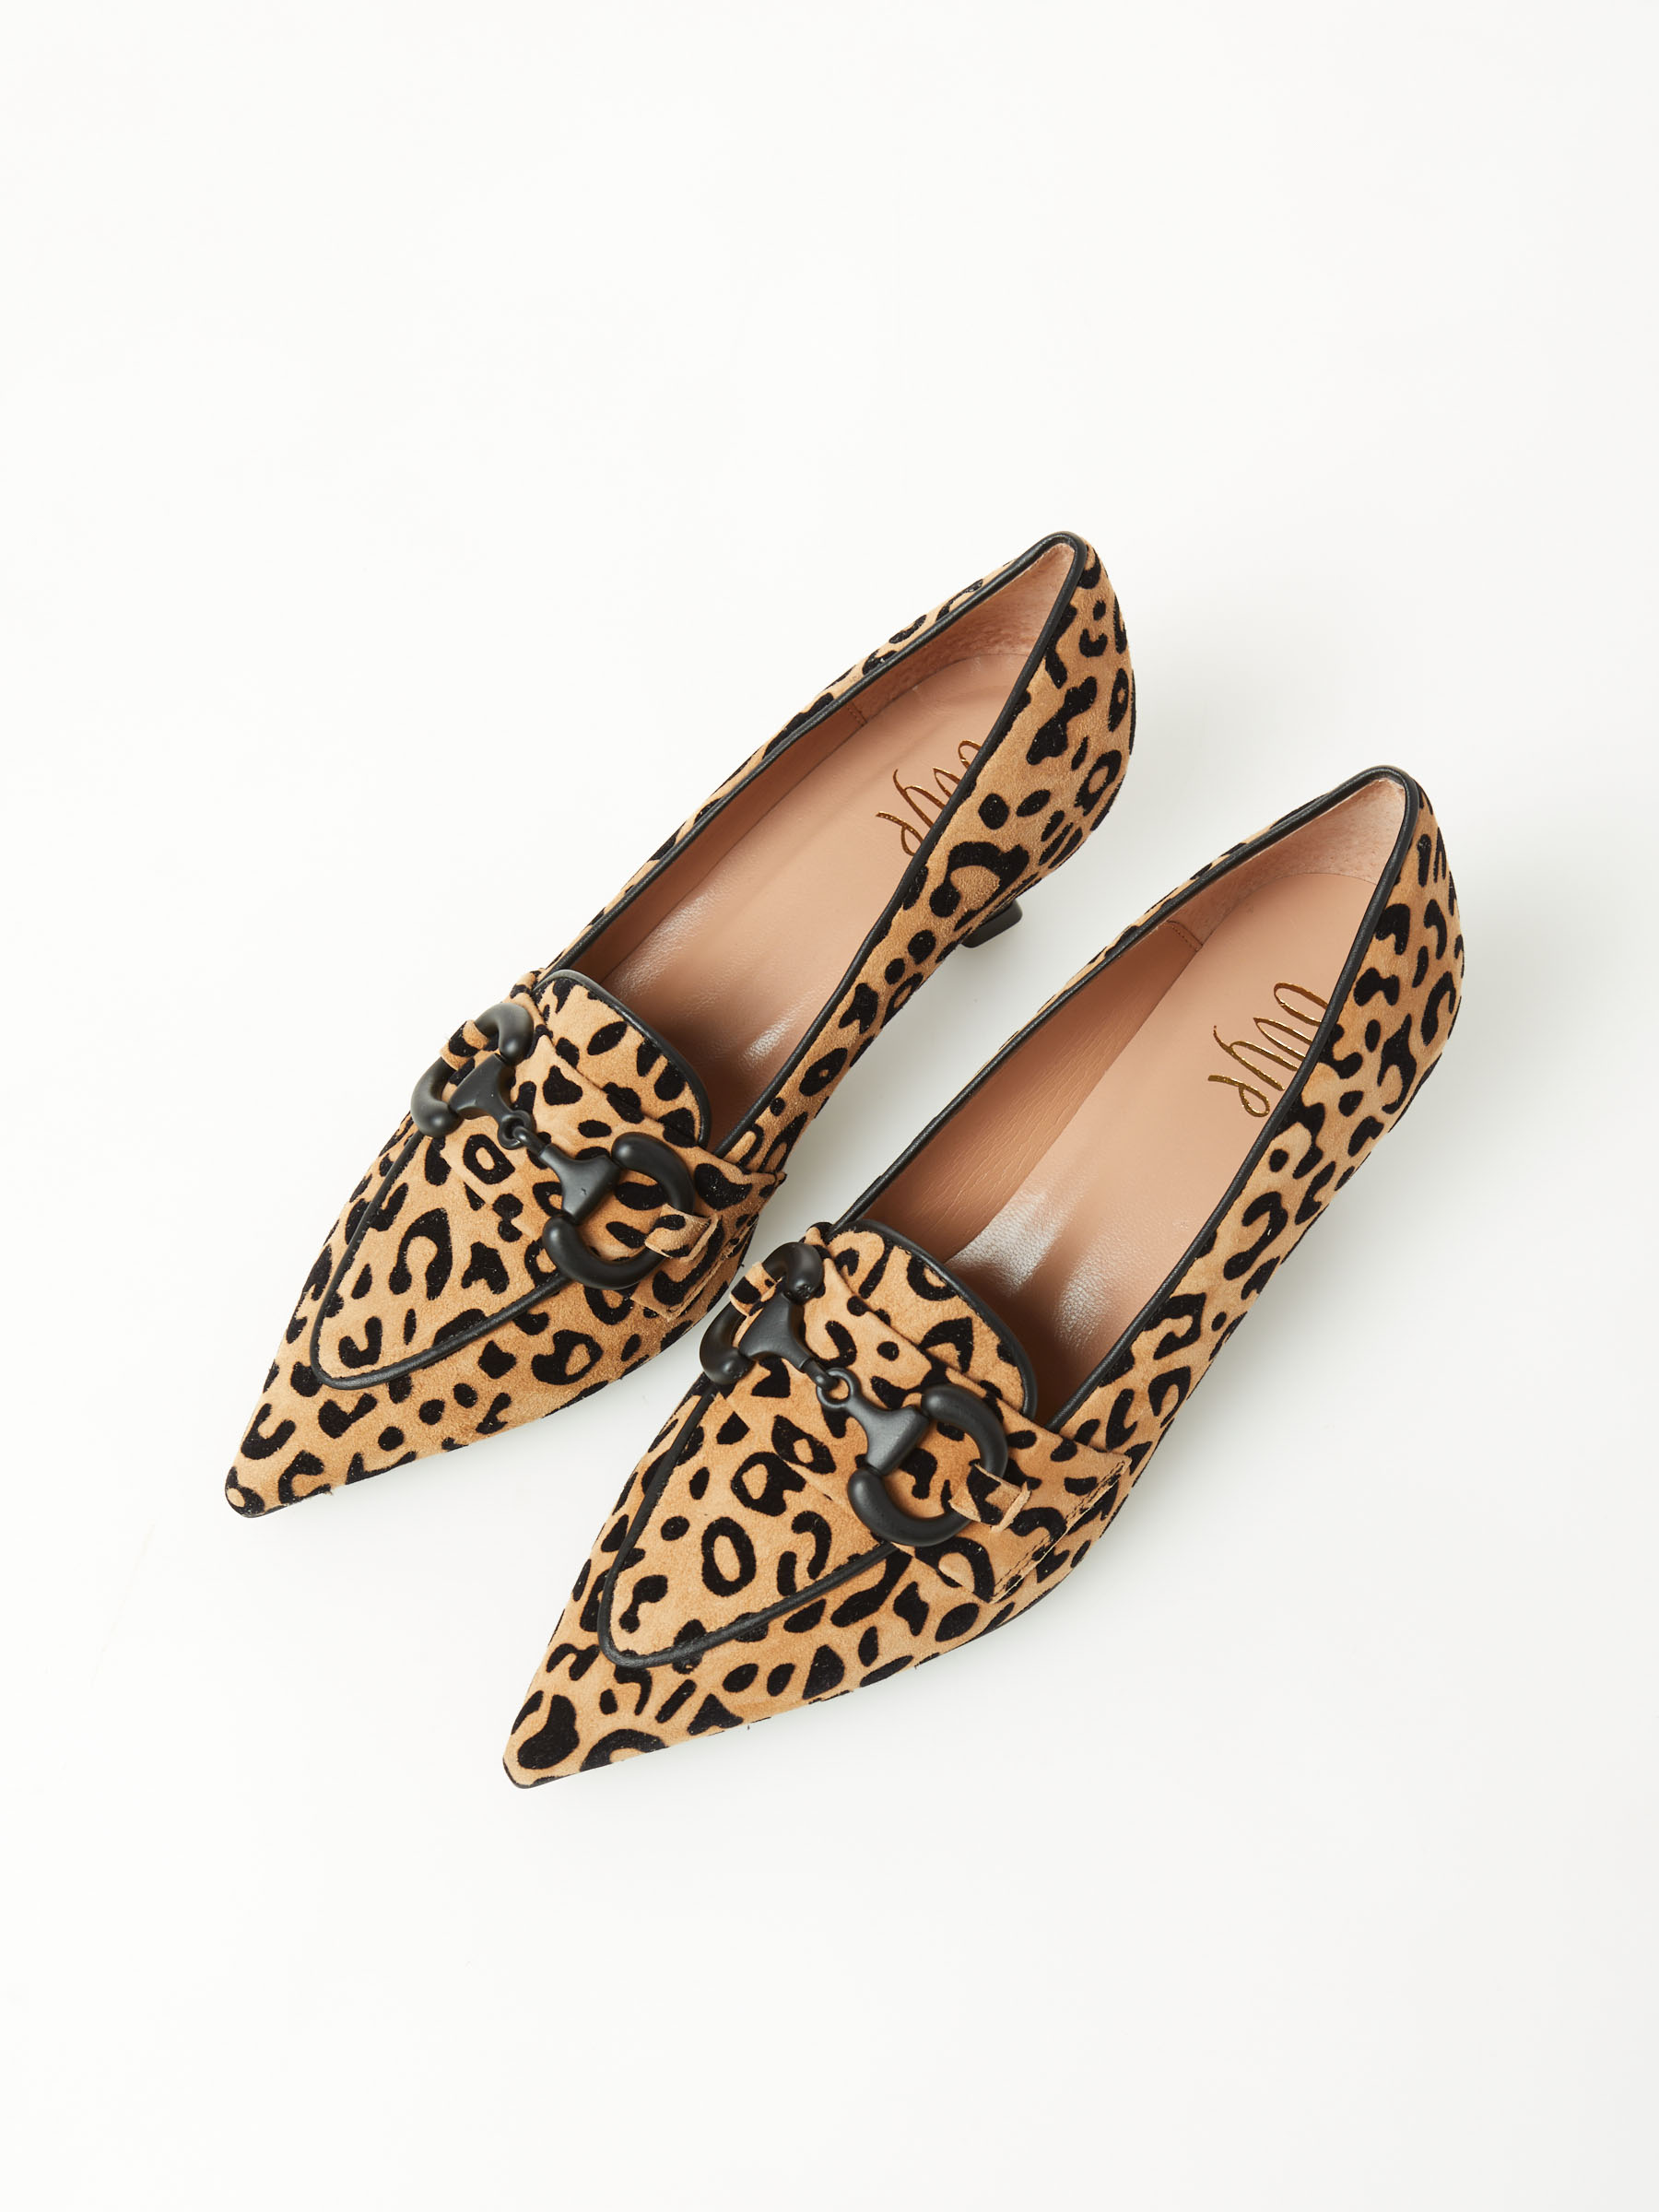 Suede Spotted Pump